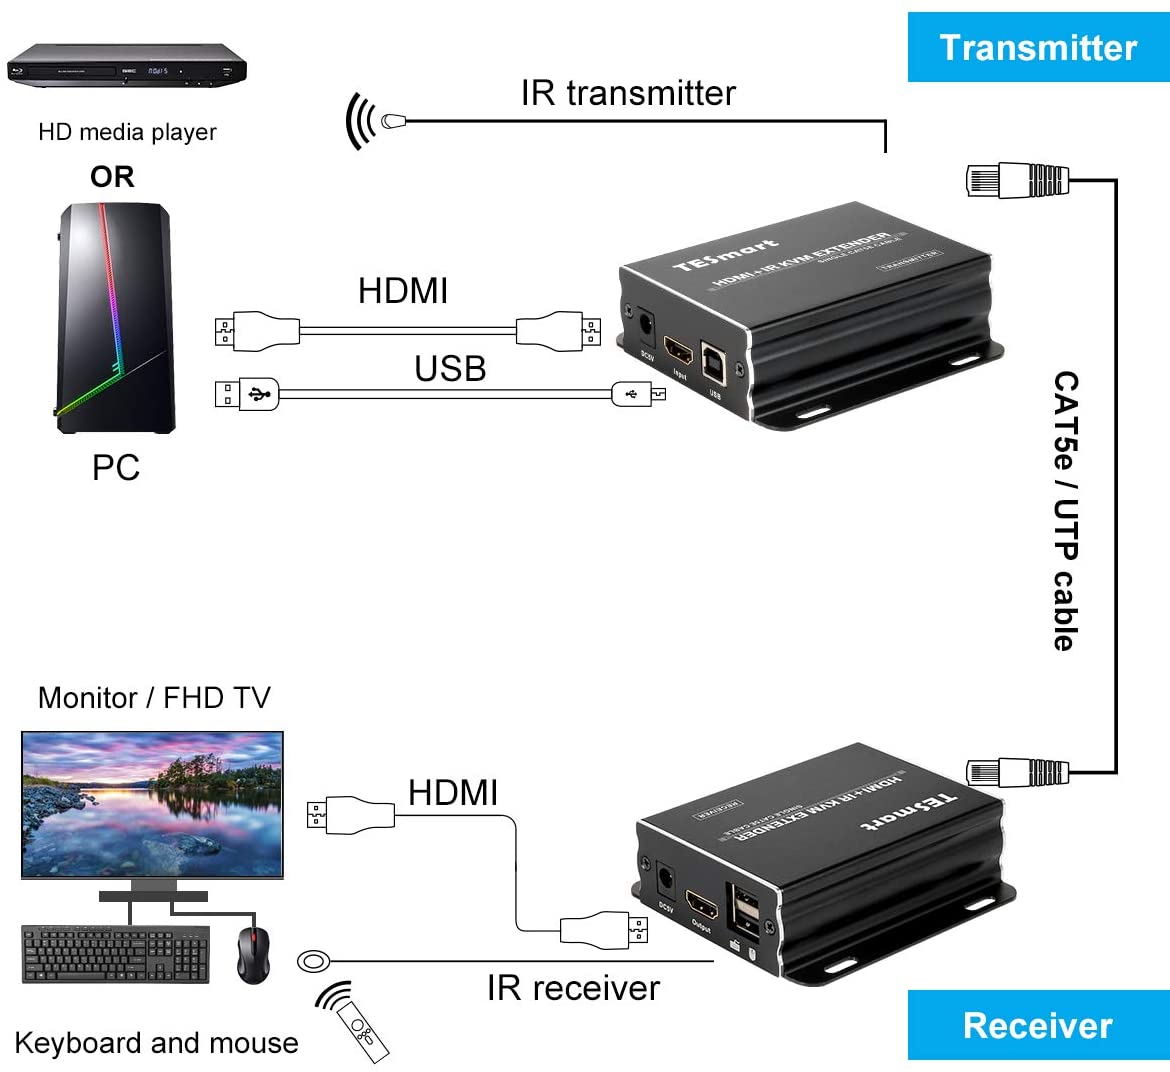 TESmart 60M HDMI KVM Extender Over Cat5e/6 with IR HDMI Extender Up to 200 Feet Support EDID 10.2 Gbps 1080P@60Hz - image 4 of 7